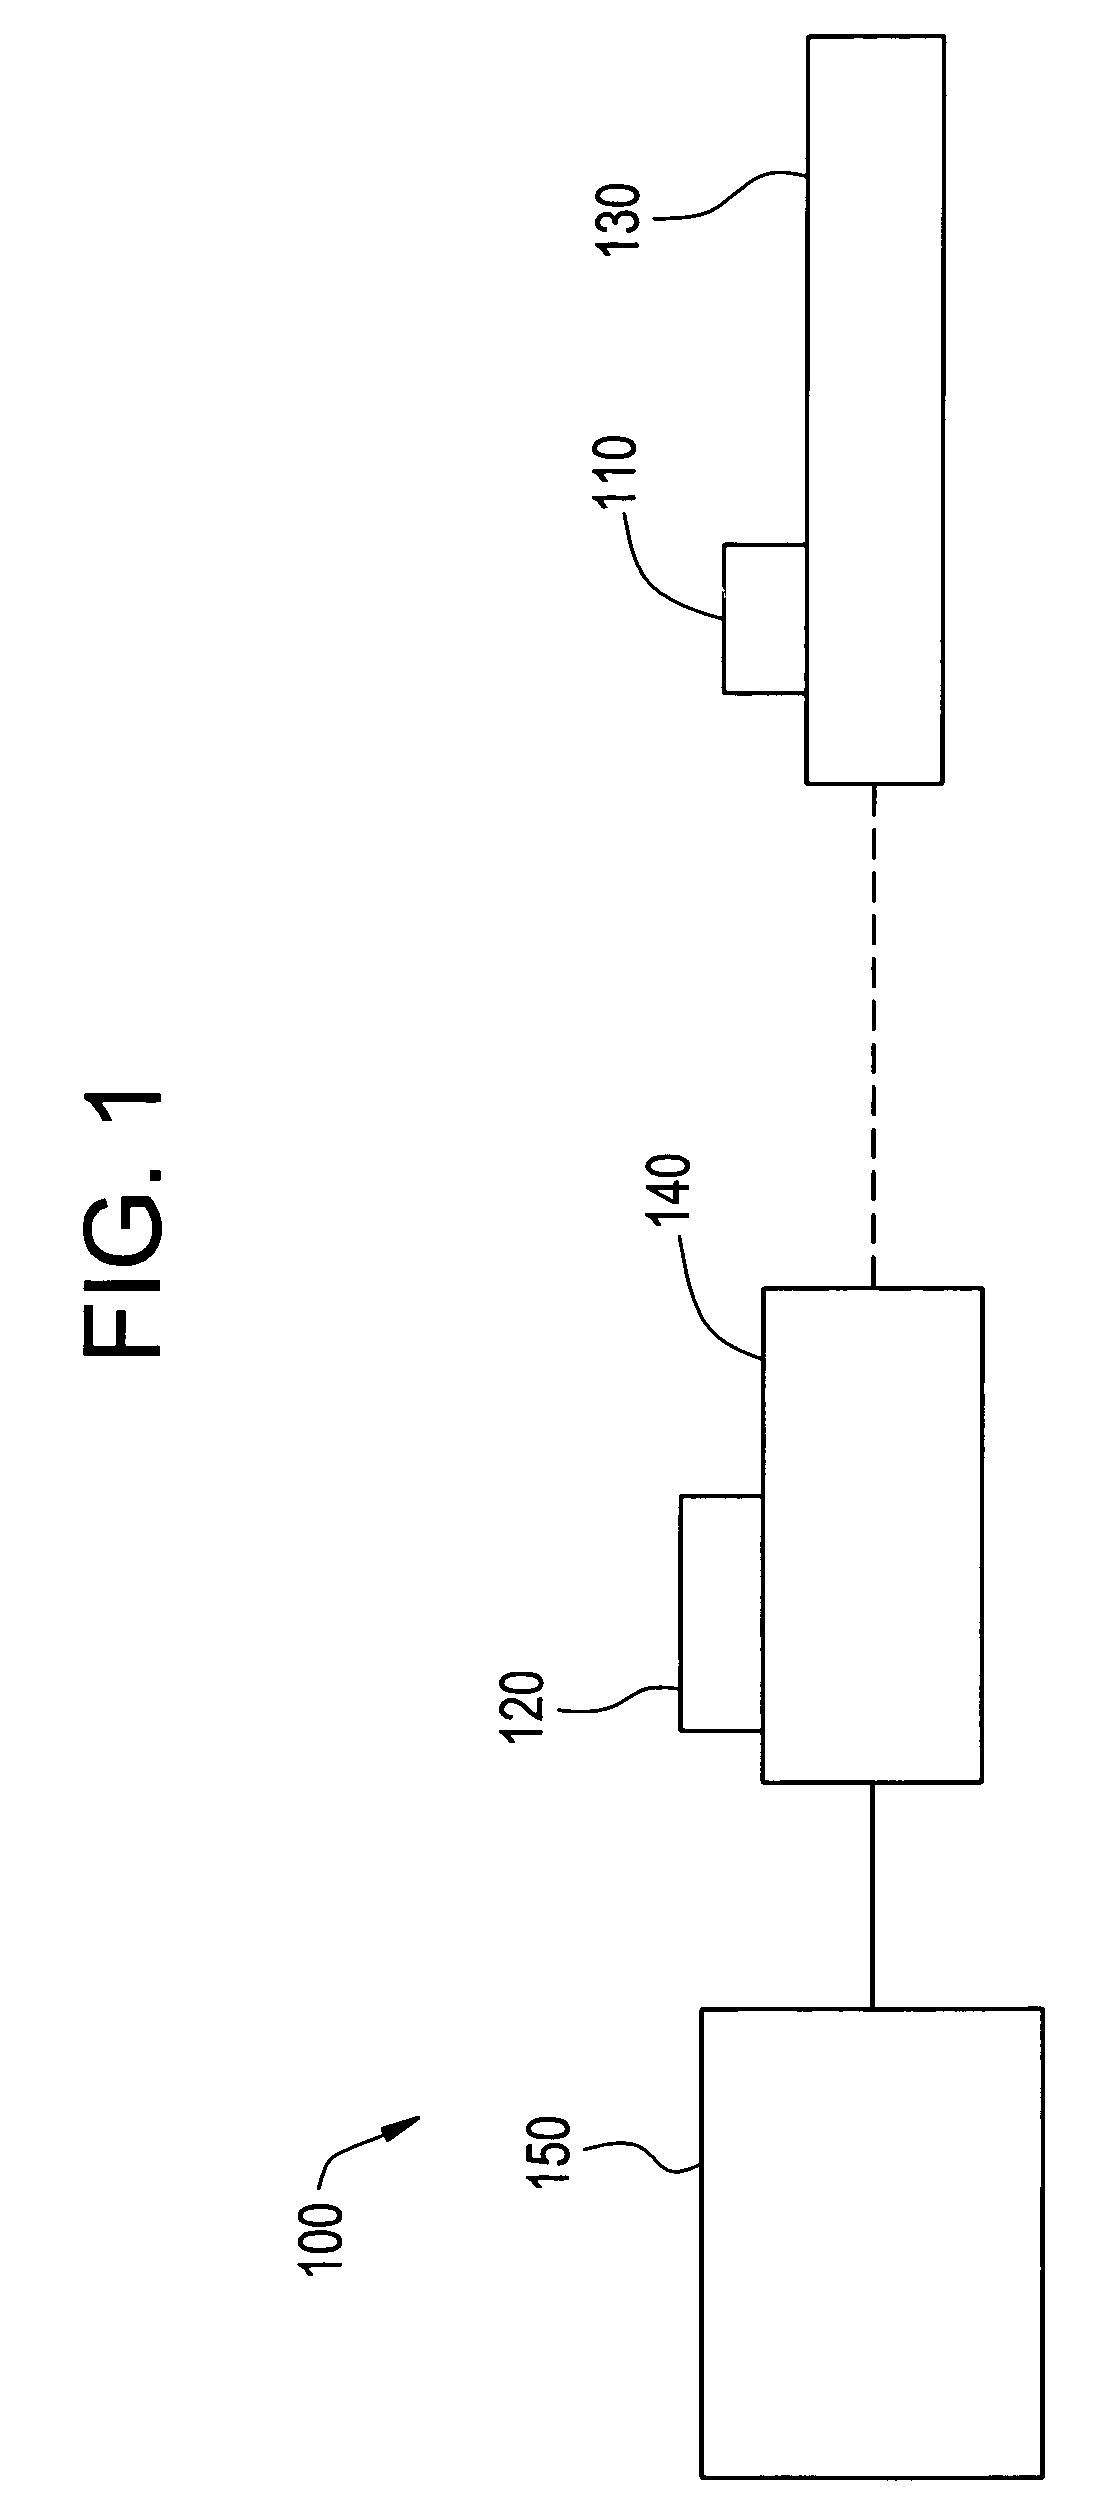 Electromagnetic tracking system and method using a three-coil wireless transmitter